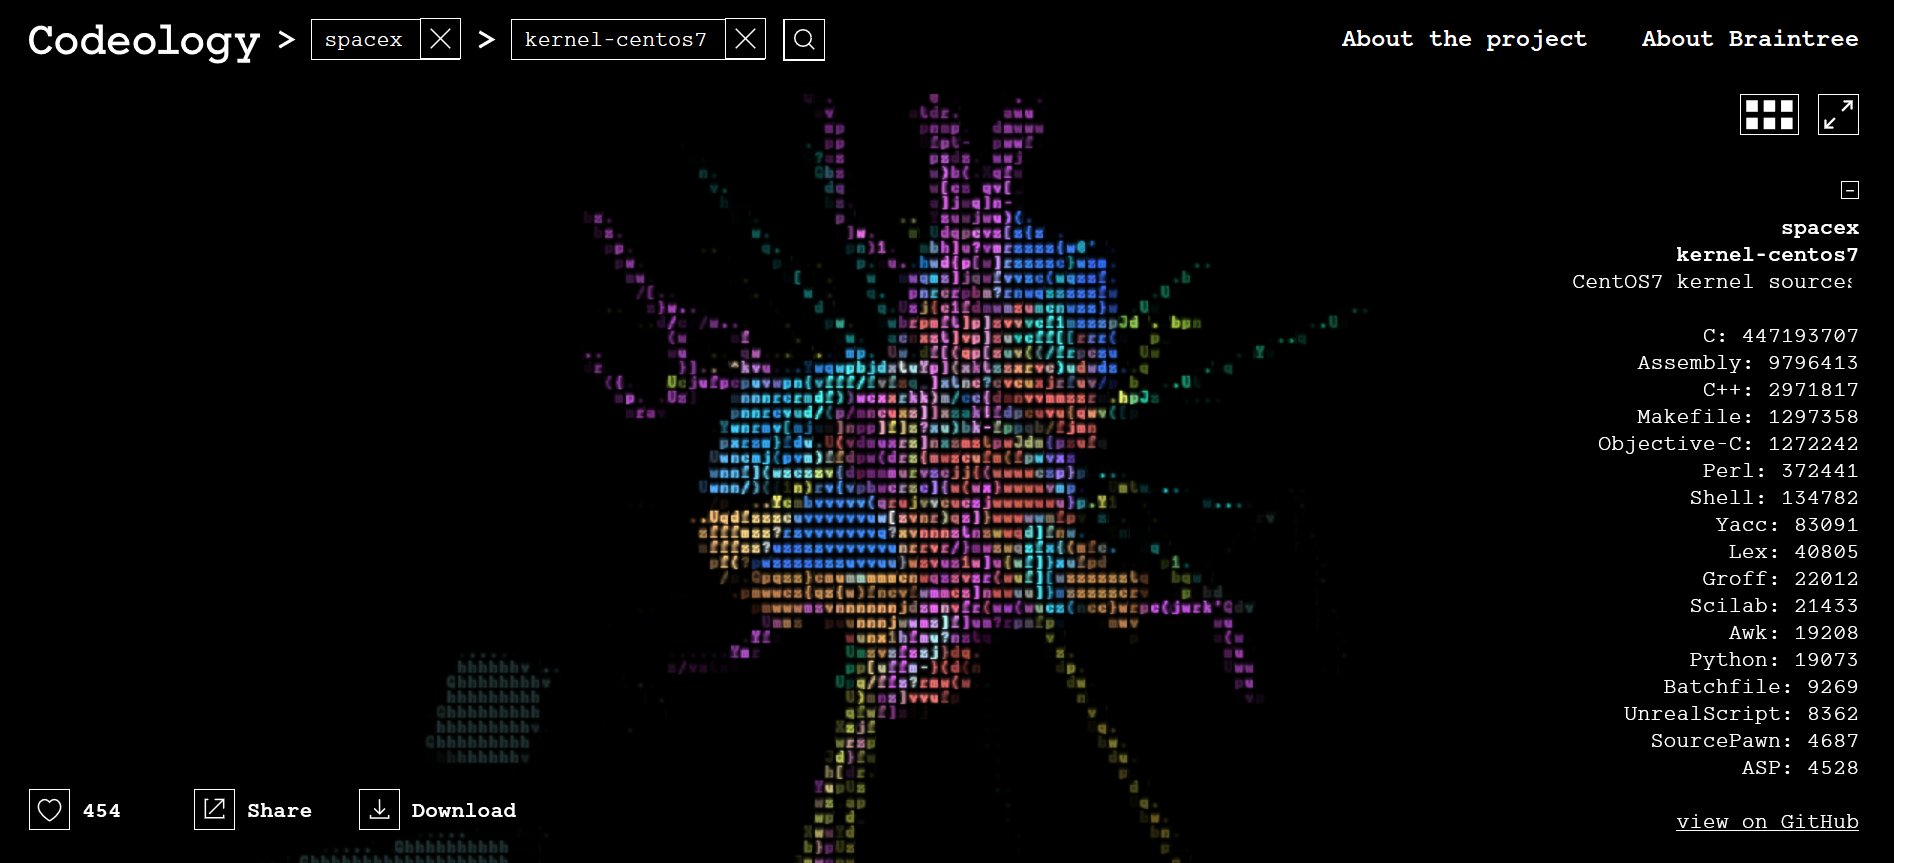 Alexis Xavier on Twitter: "#Codeology, a tool that converts source code  #GitHub projects into works of art | #kernel #CentOS #unix  https://t.co/ThkmVMzBLQ https://t.co/dQiPruH27n" / Twitter